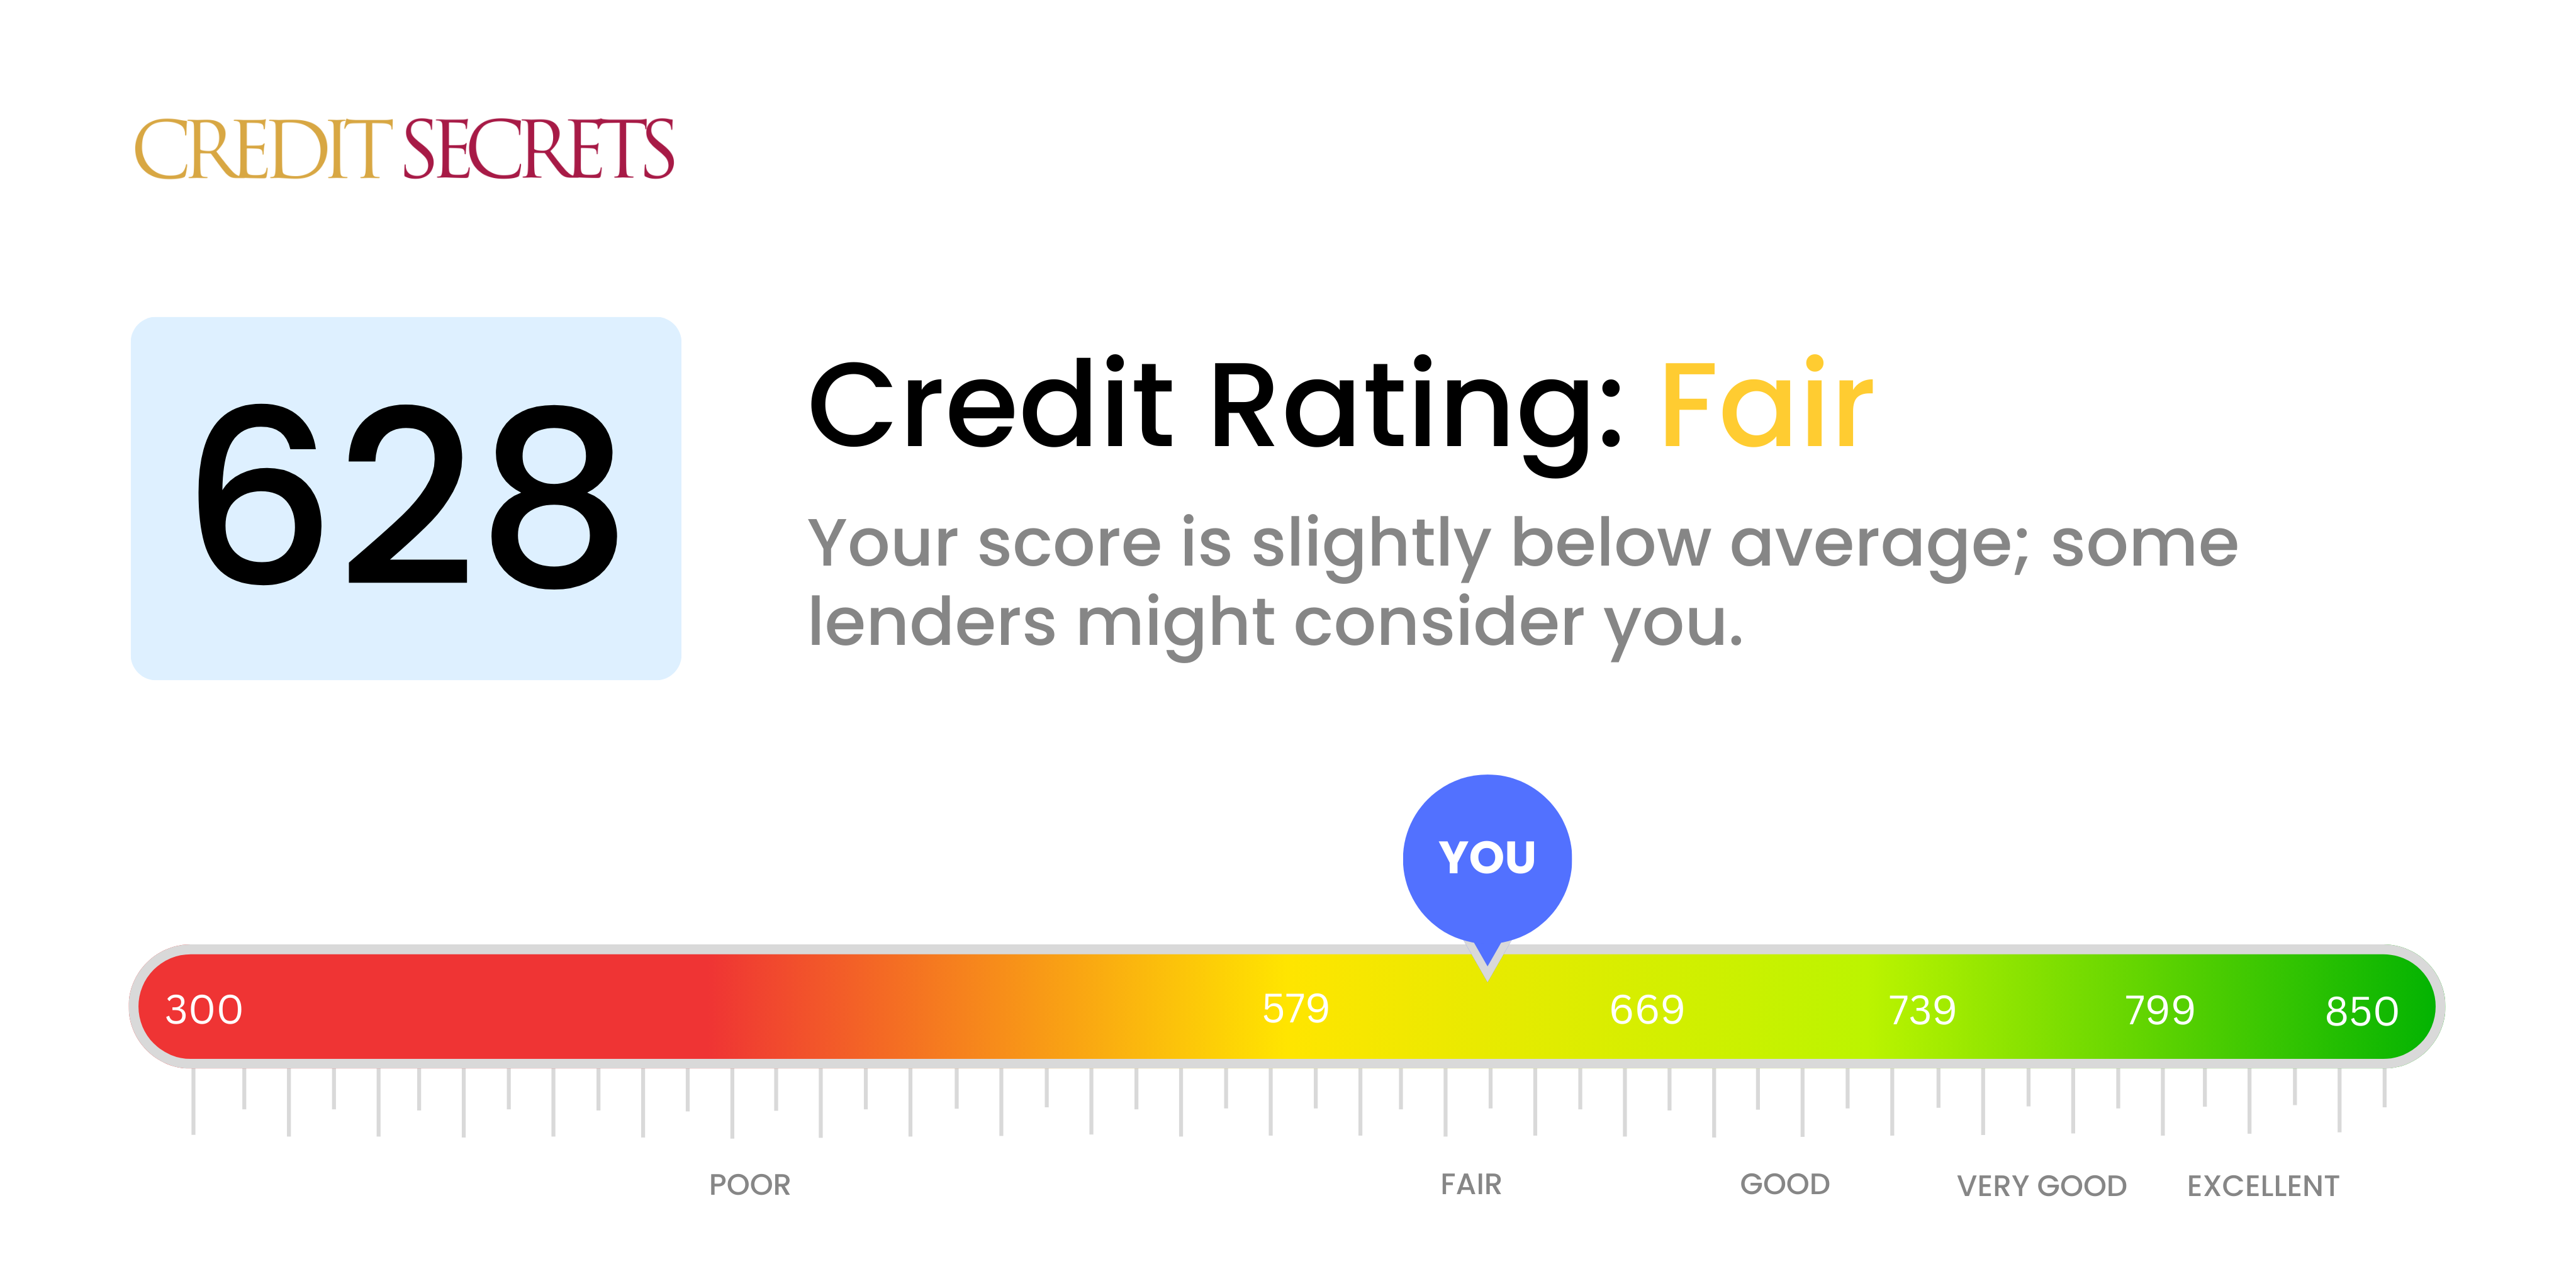 Is 628 a good credit score?